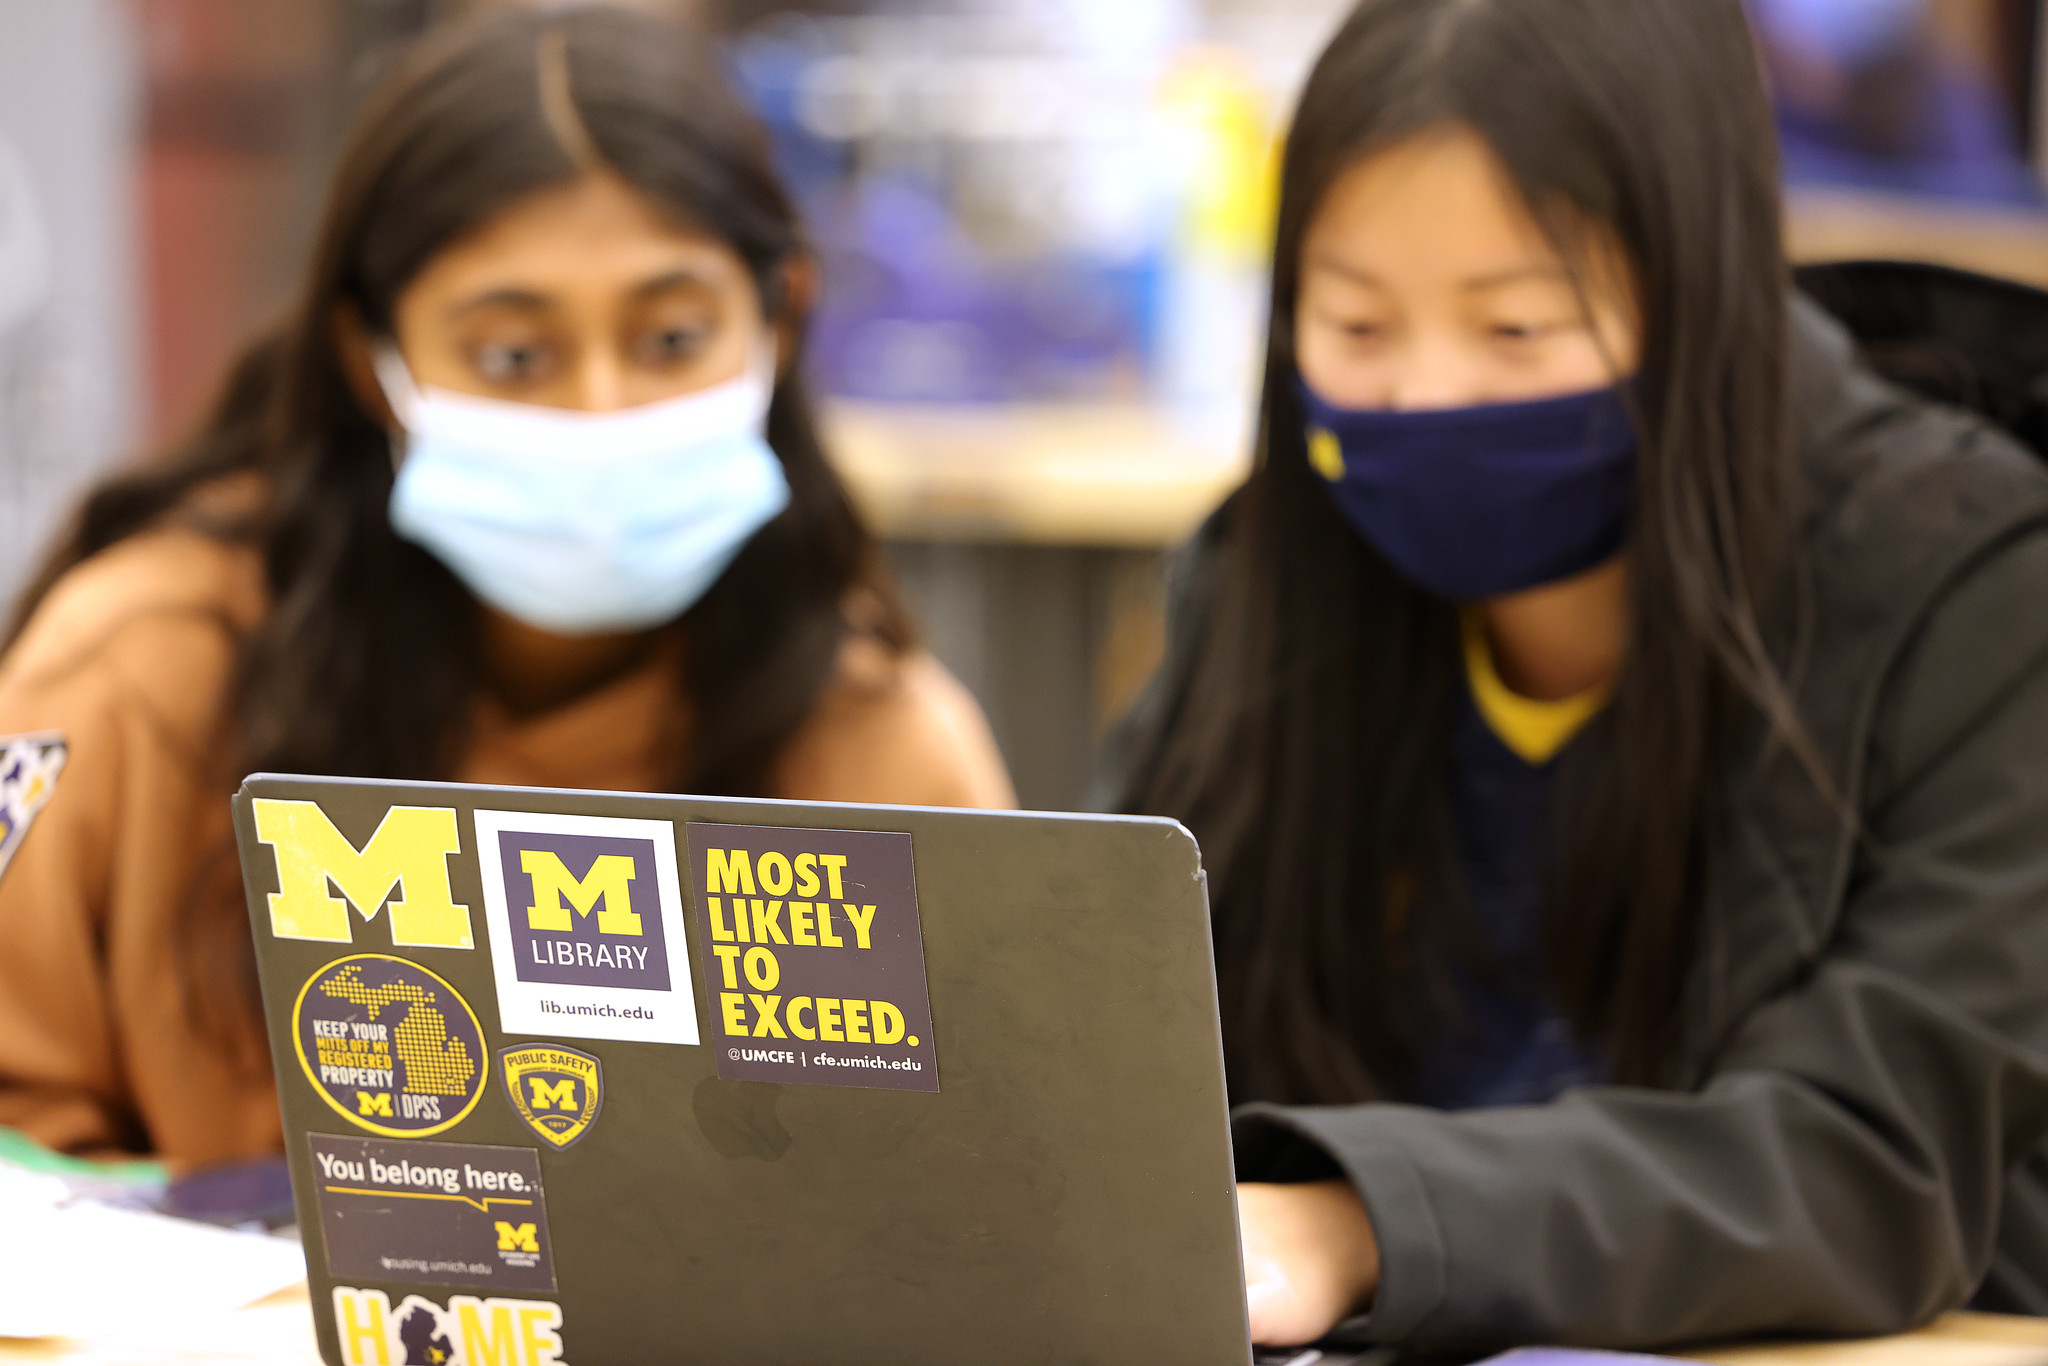 Two female University of Michigan students in masks collaborate around a laptop with a Most LIkely To Exceed Sticker